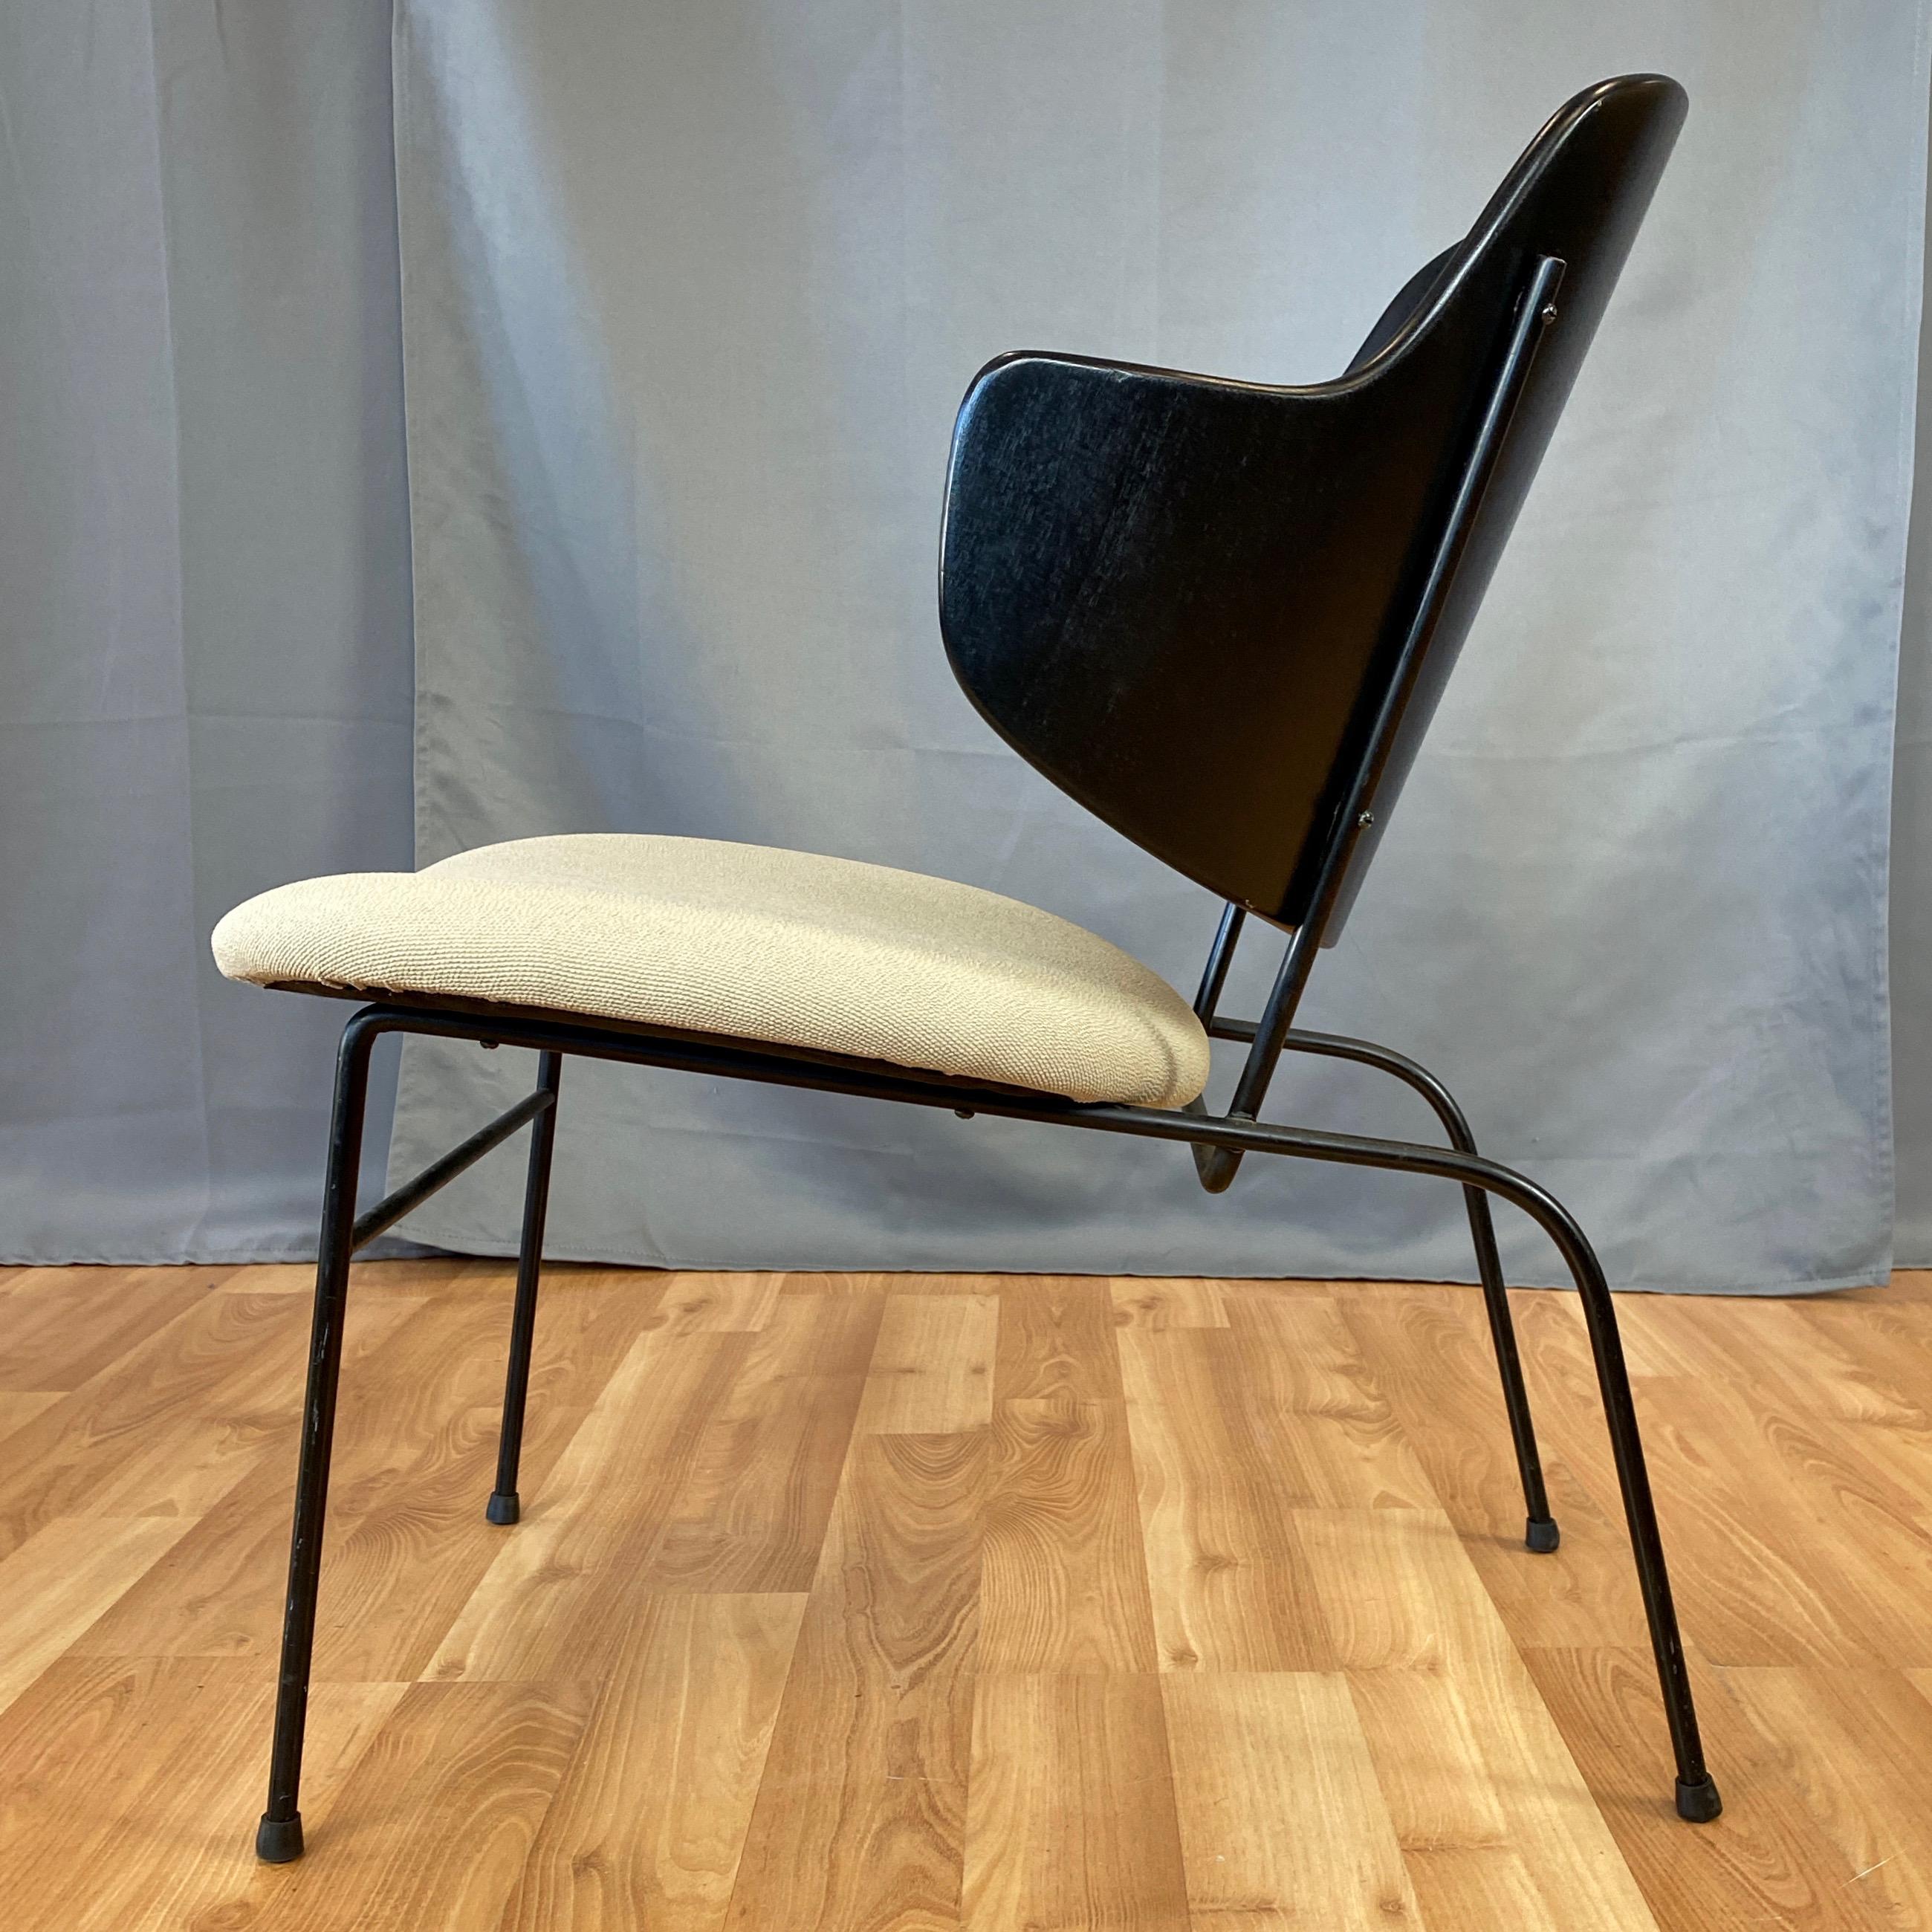 A rare 1950s lower and wider version of Ib Kofod-Larsen’s iconic Penguin lounge chair with newly upholstered seat.

Iron rod frame in original satin black finish features extended back legs that give the piece a strikingly handsome stance. Further